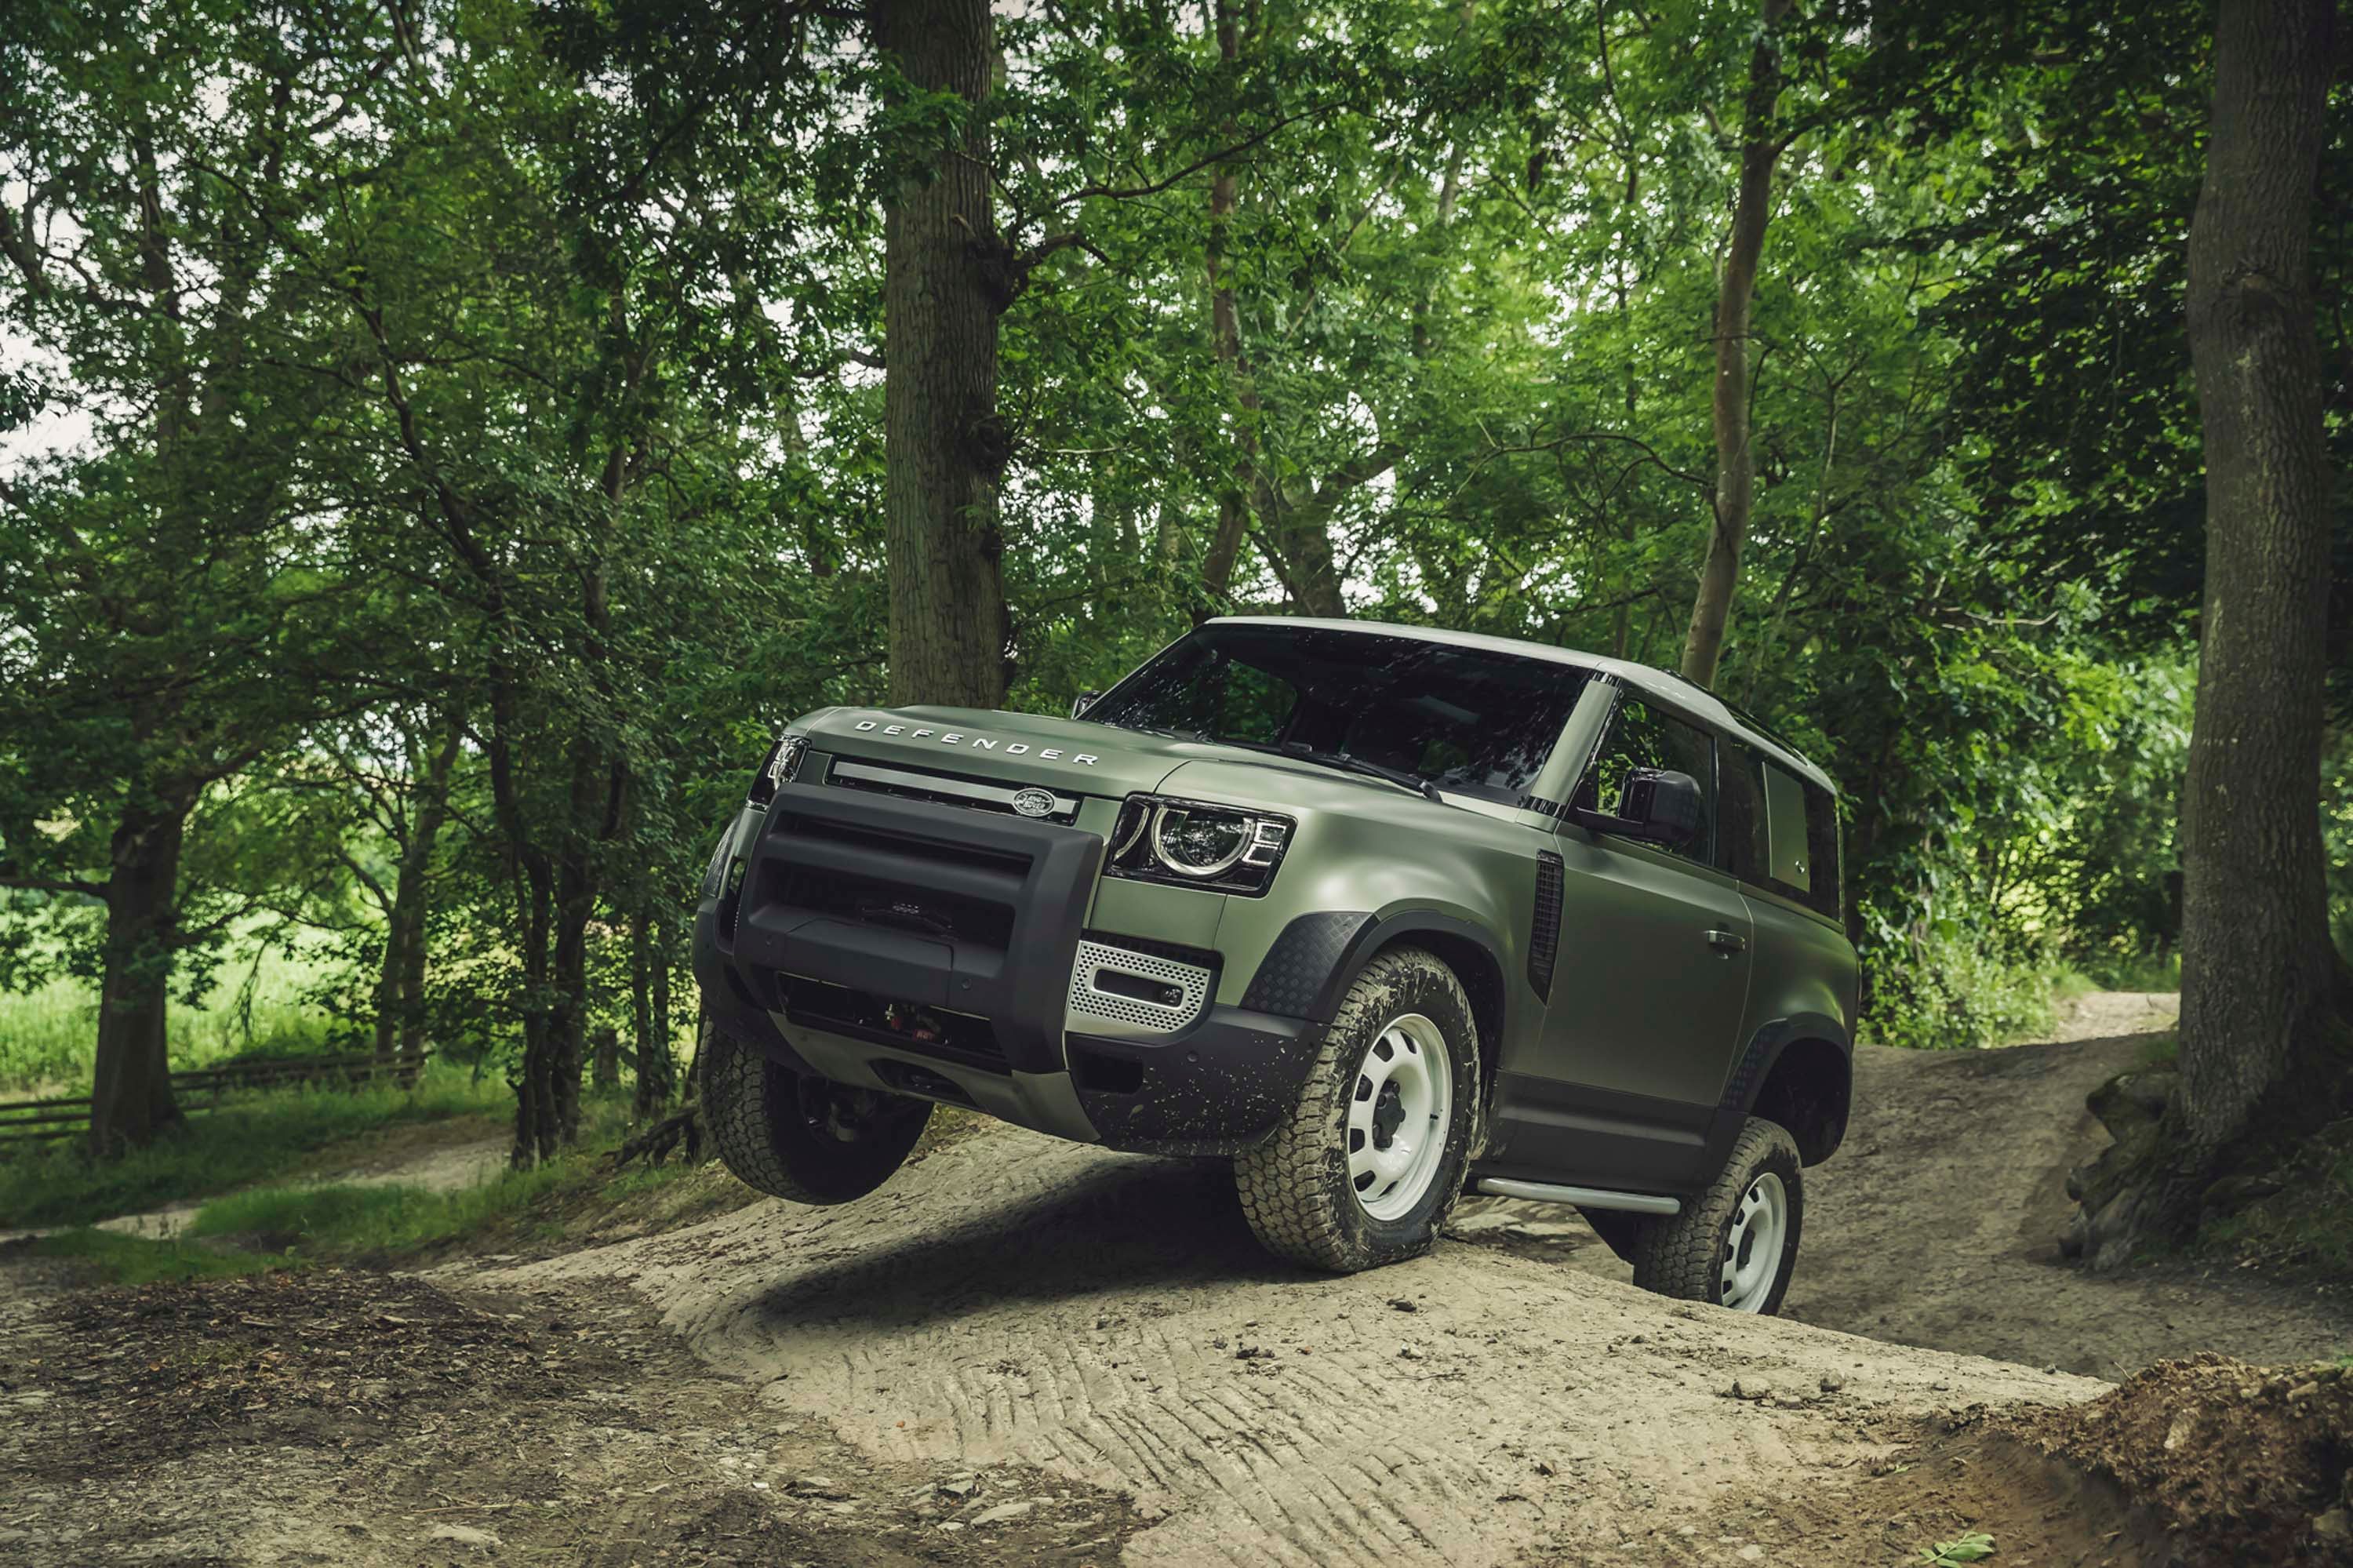 2020 Land Rover Is Working On Some Seriously Pointless Tech